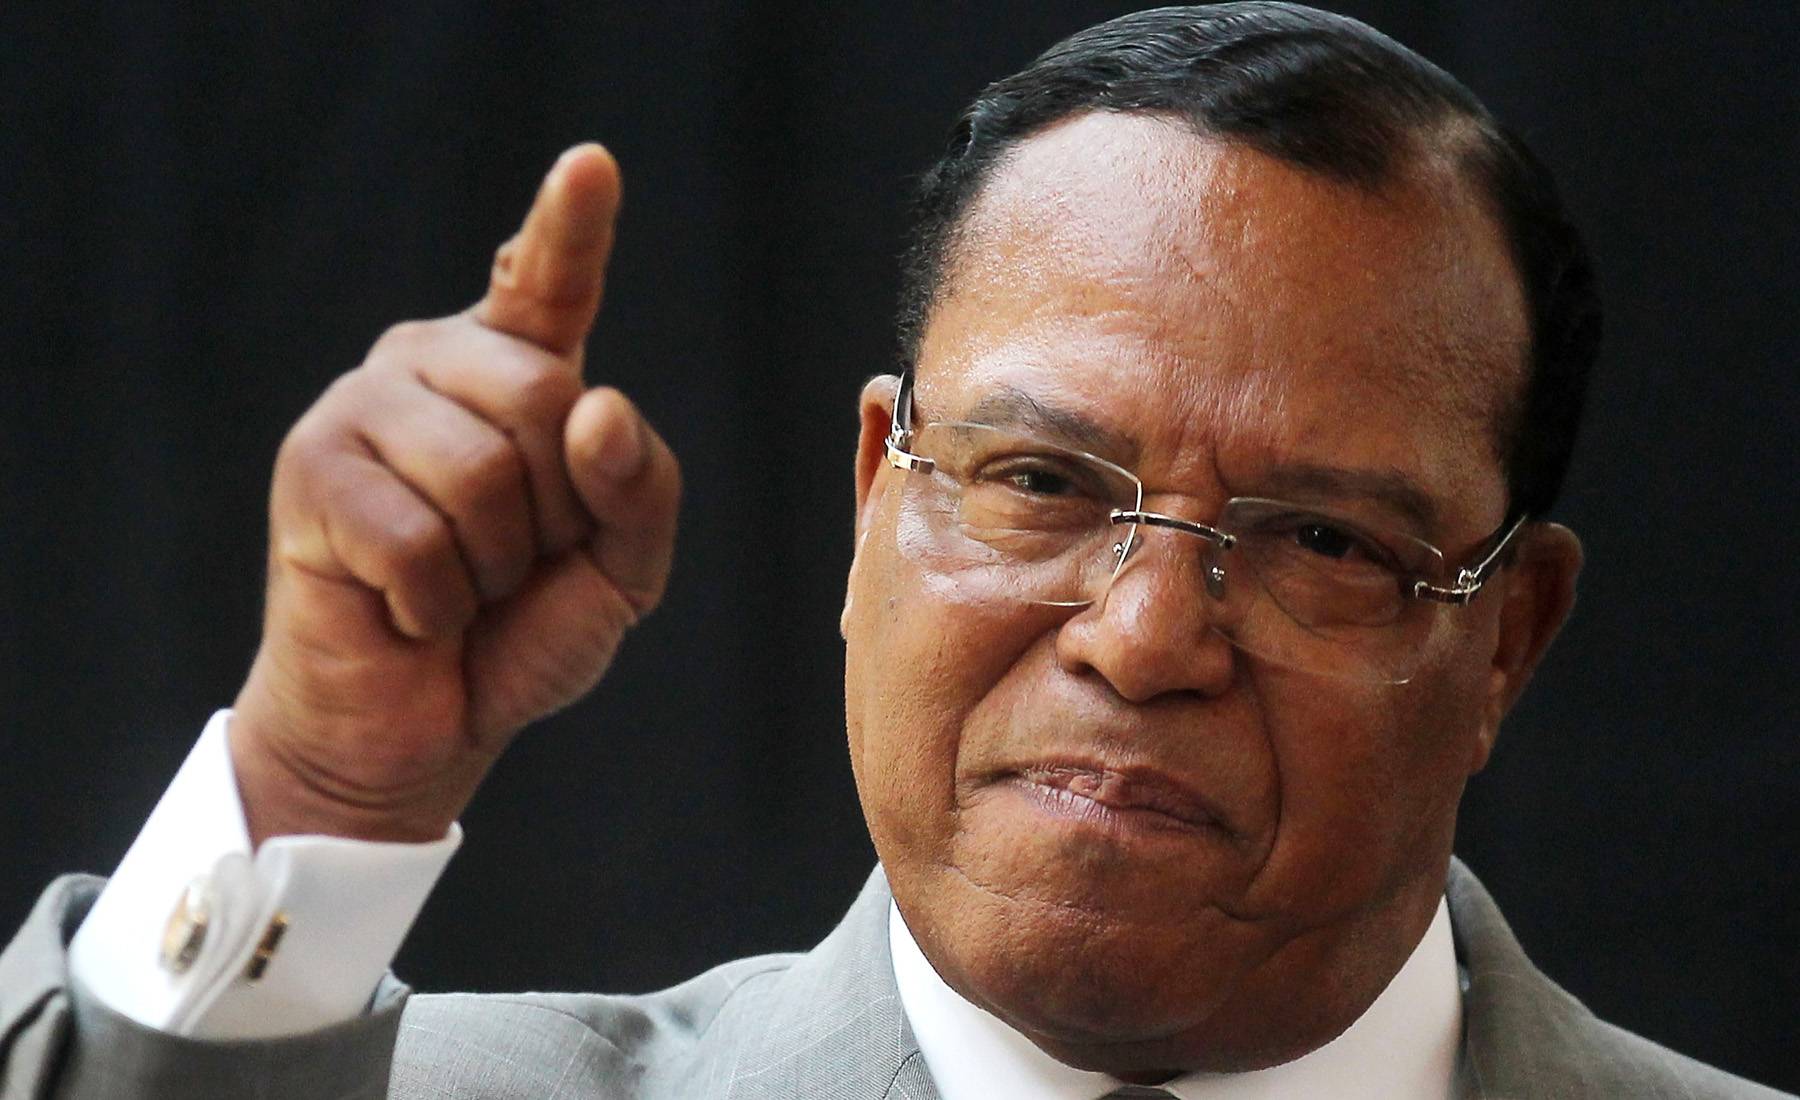 Farrakhan Says Racism Could Spark Assassination Attempts on Obama - Minister&nbsp;Louis Farrakhan,&nbsp;the leader of the&nbsp;Nation of Islam, announced last week that the intense level of criticism of President Obama&nbsp;has created an environment that could lead to assassination attempts on the nation’s first African-American president.(Photo: Mario Tama/Getty Images)